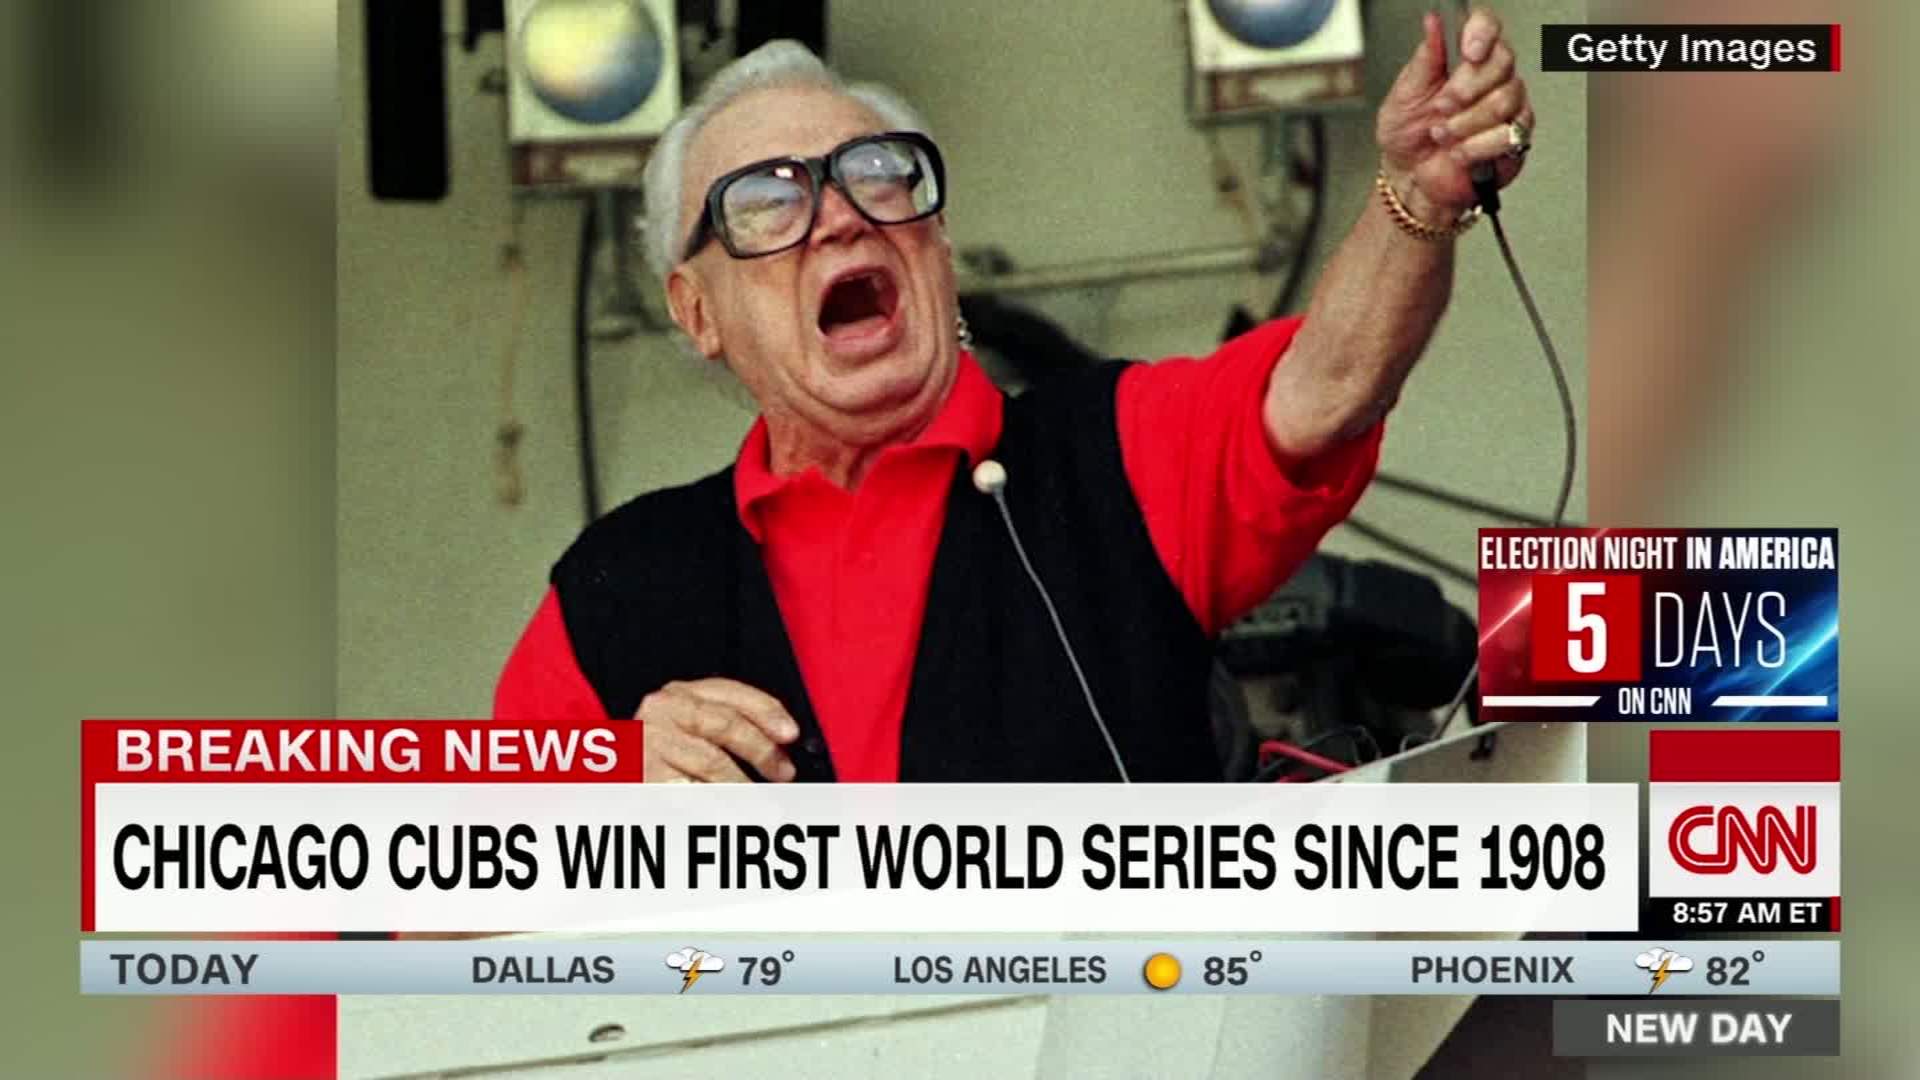 On this Date in 1998: Cubs broadcaster Harry Caray dies